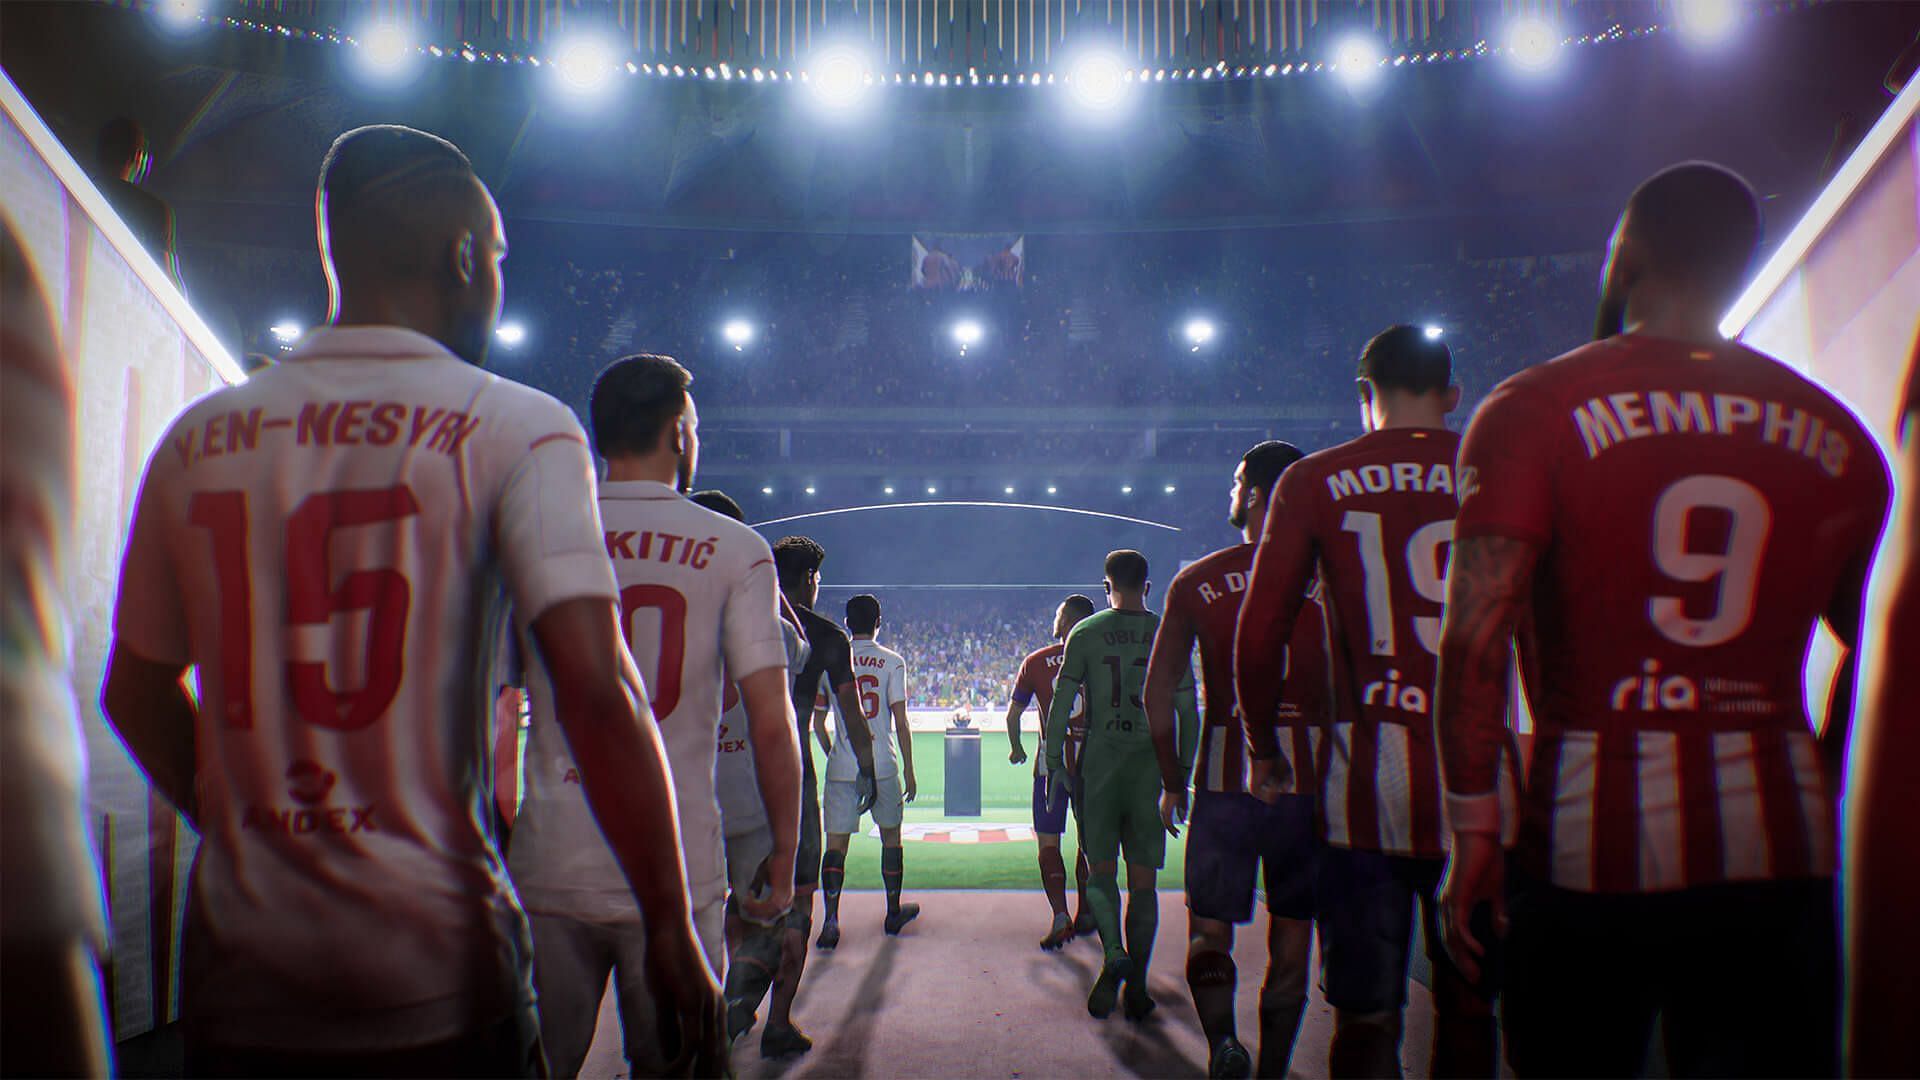 2K is rumored to be the makers of next FIFA game (Image via EA Sports)